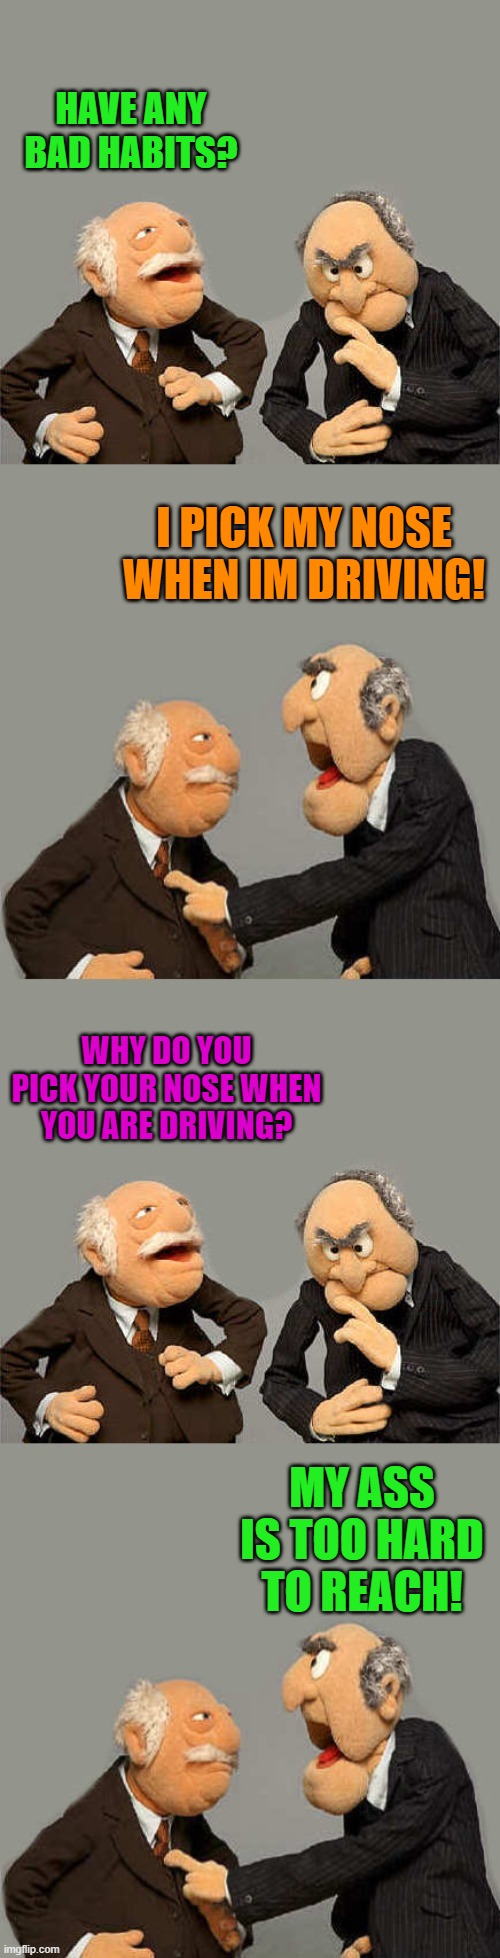 Don't pick your nose | HAVE ANY BAD HABITS? I PICK MY NOSE WHEN IM DRIVING! WHY DO YOU PICK YOUR NOSE WHEN YOU ARE DRIVING? MY ASS IS TOO HARD TO REACH! | image tagged in joke | made w/ Imgflip meme maker